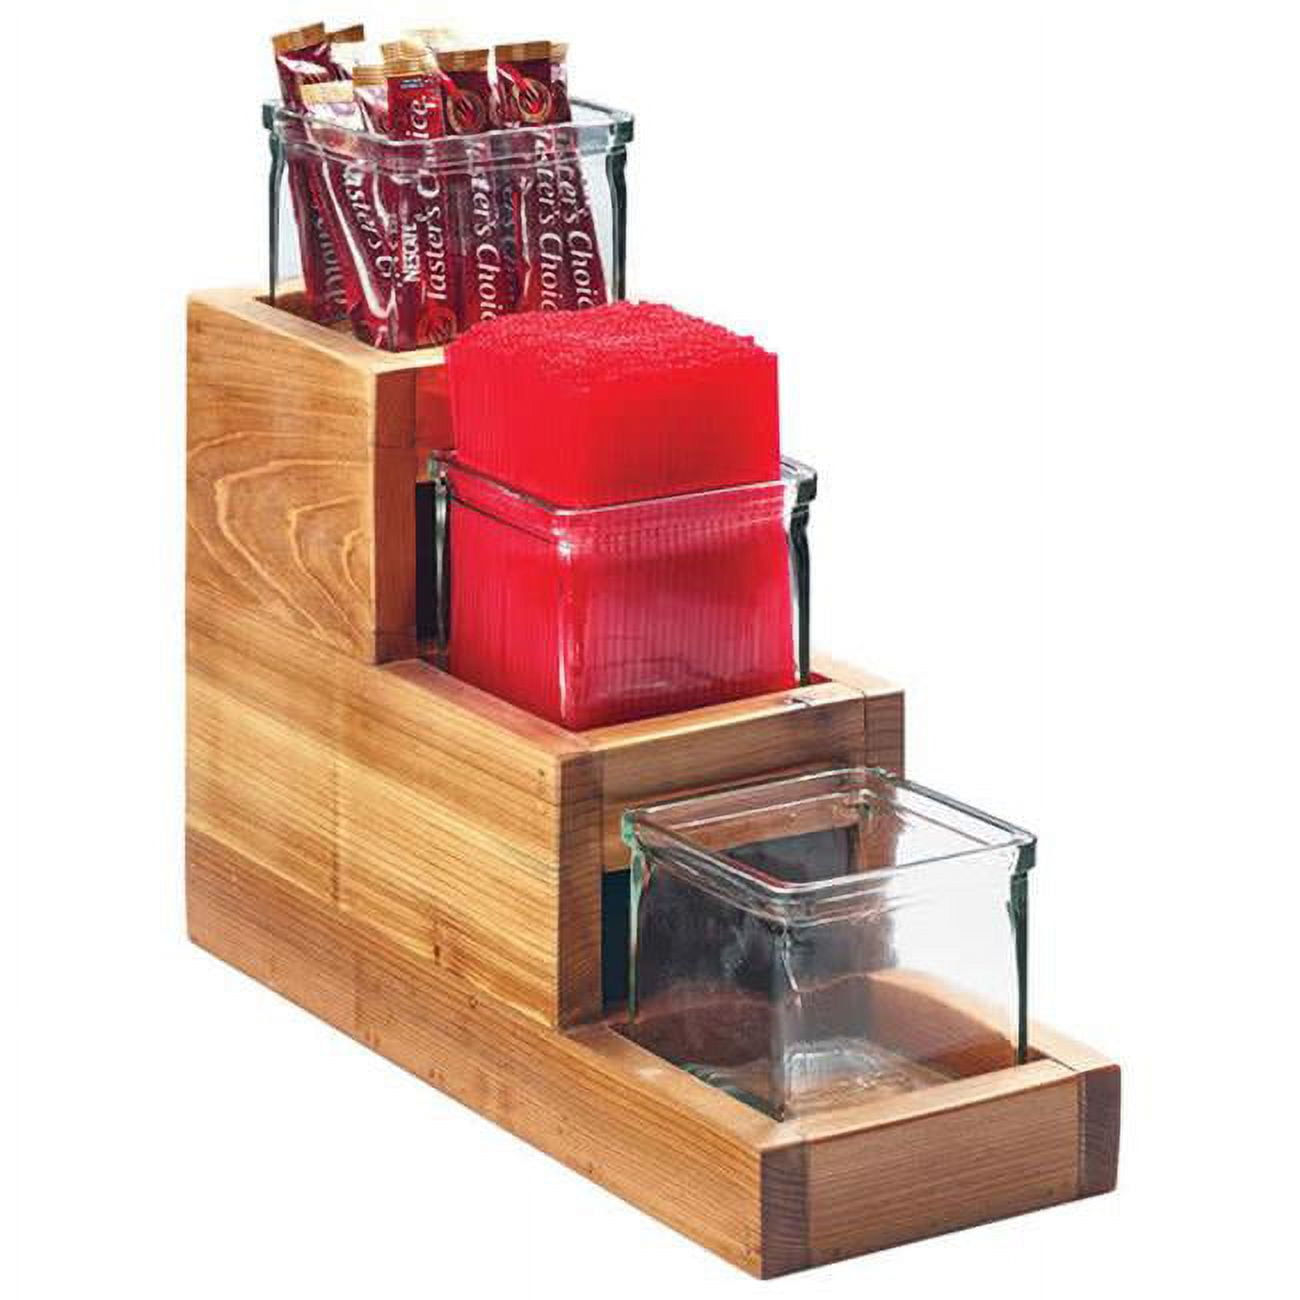 3612-4-99 3-step Madera Reclaimed Wood Display With 3 Glass Jars - 5.25 X 14.5 X 12.5 In.